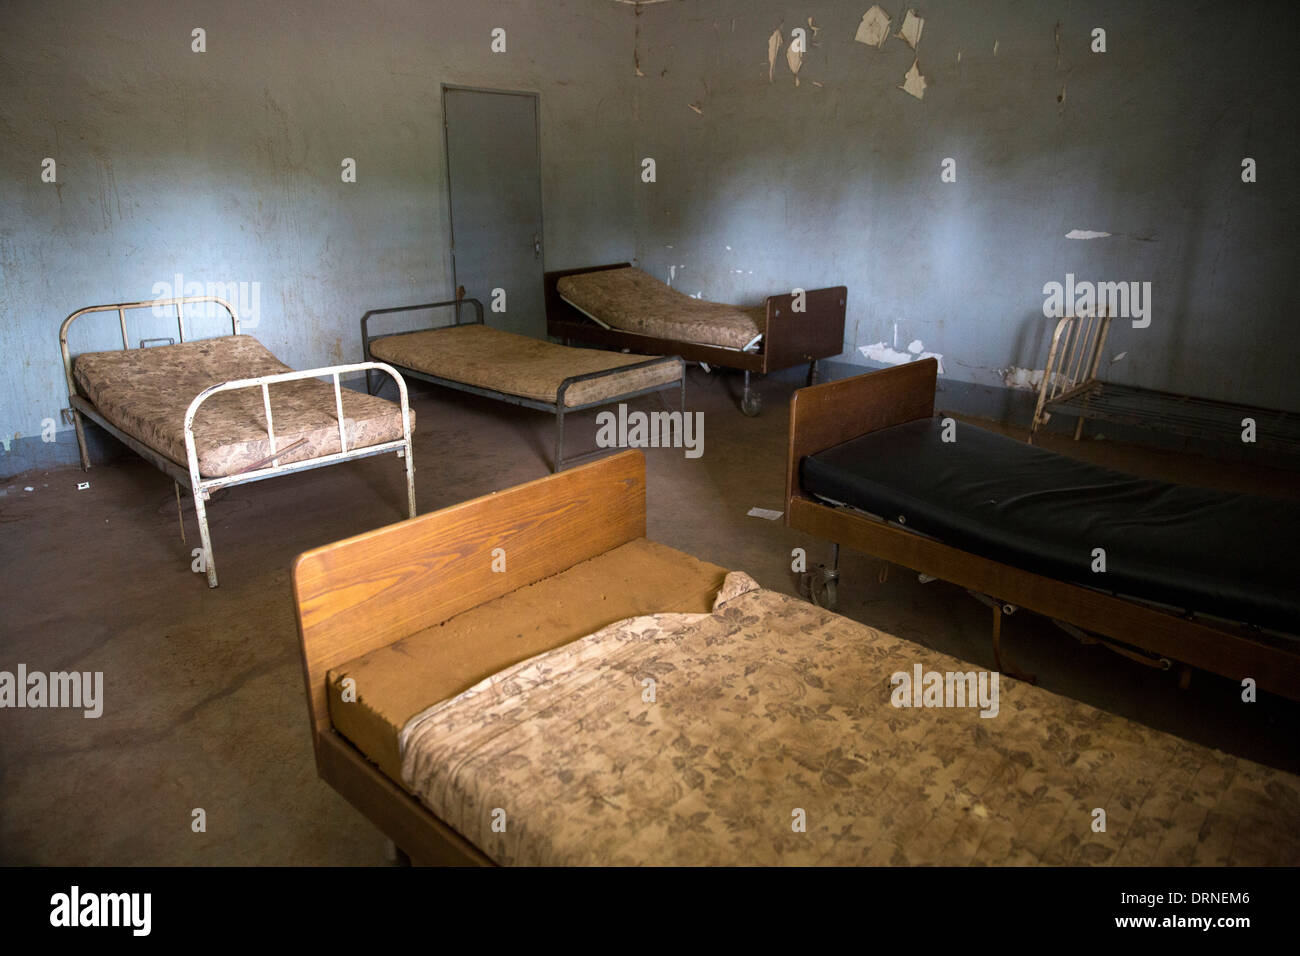 beds in ward in rural medical centre, Burkina Faso, Africa Stock Photo